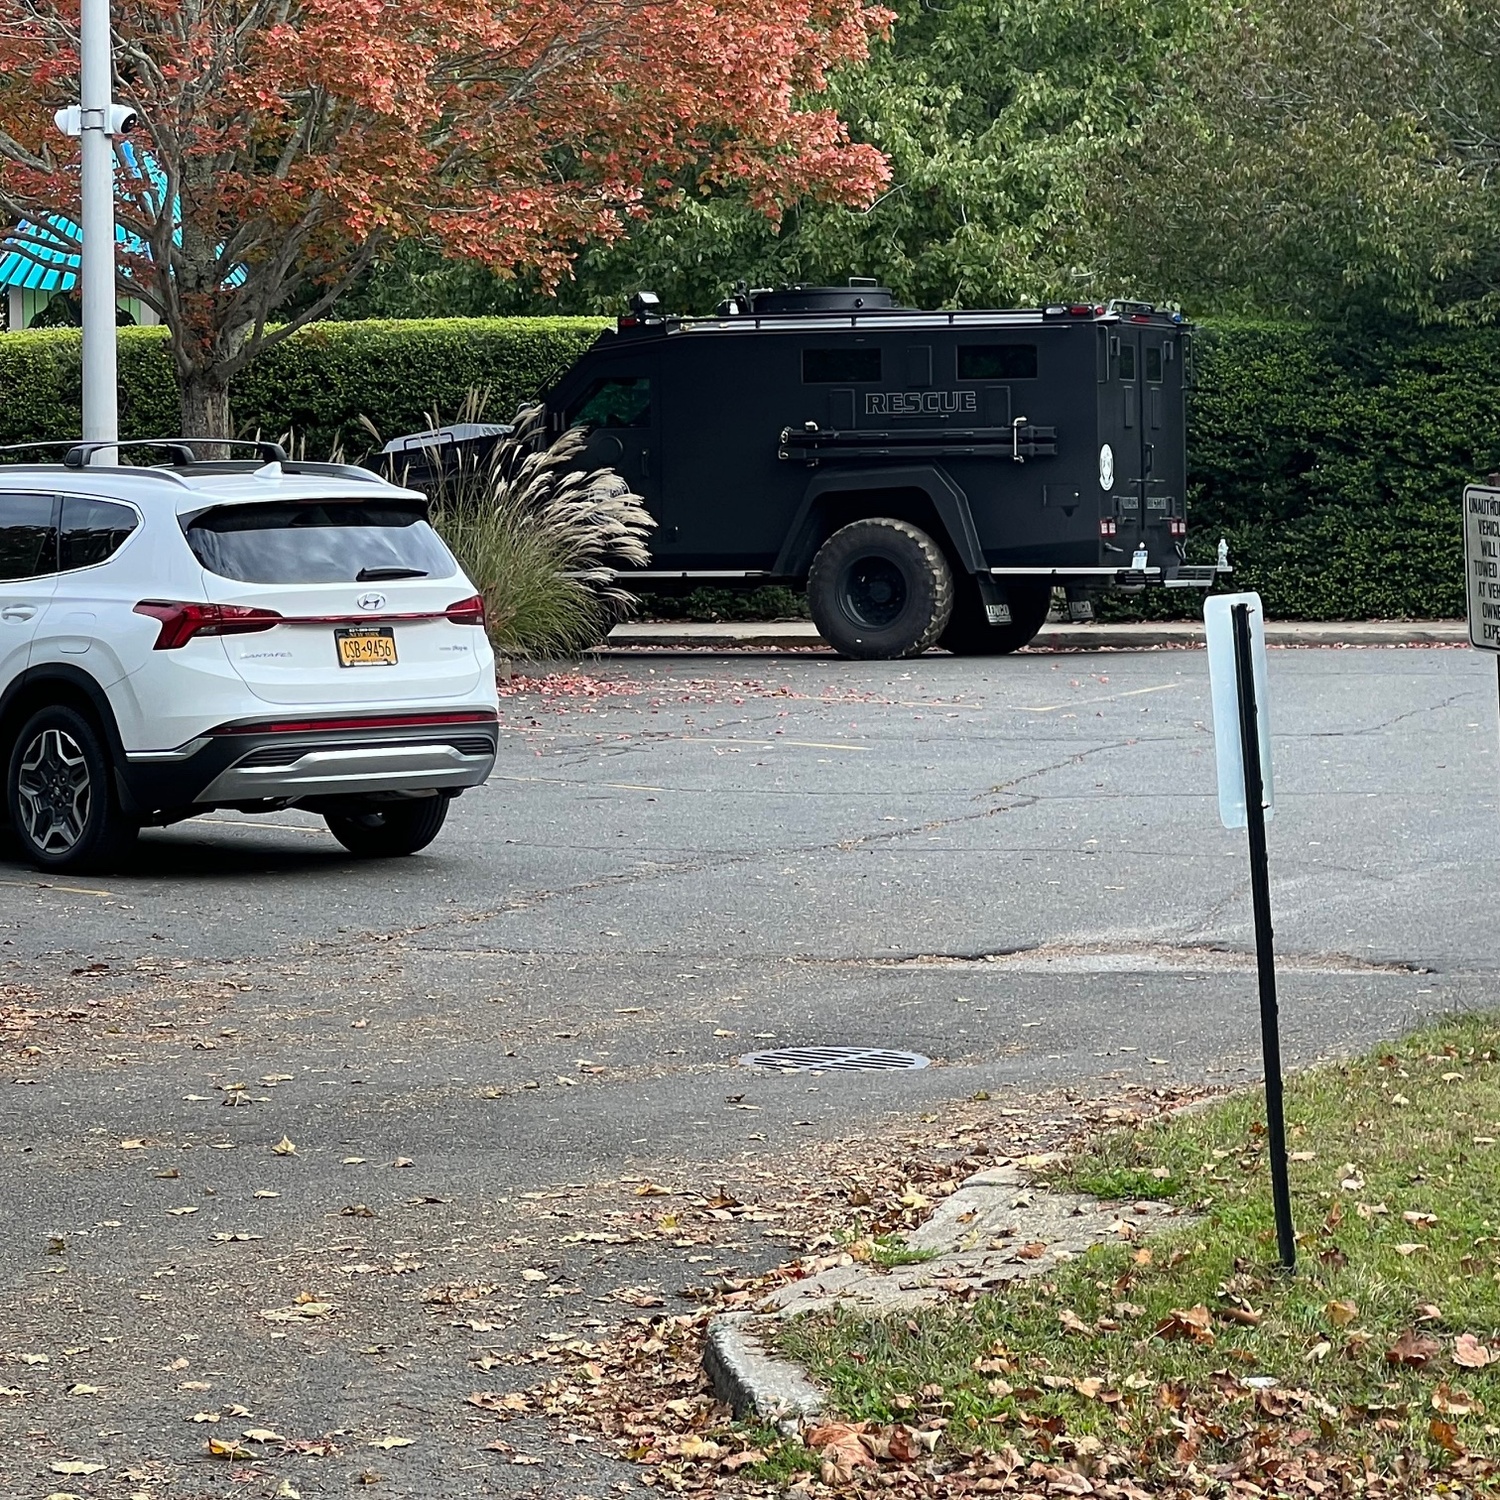 A bomb threat that turned out to be false caused the evacuation of the Amagansett School on Wednesday morning, two days after a similar threat force Southampton schools to evacuate more than 1,300 students from three buildings. 
KYRIL BROMLEY